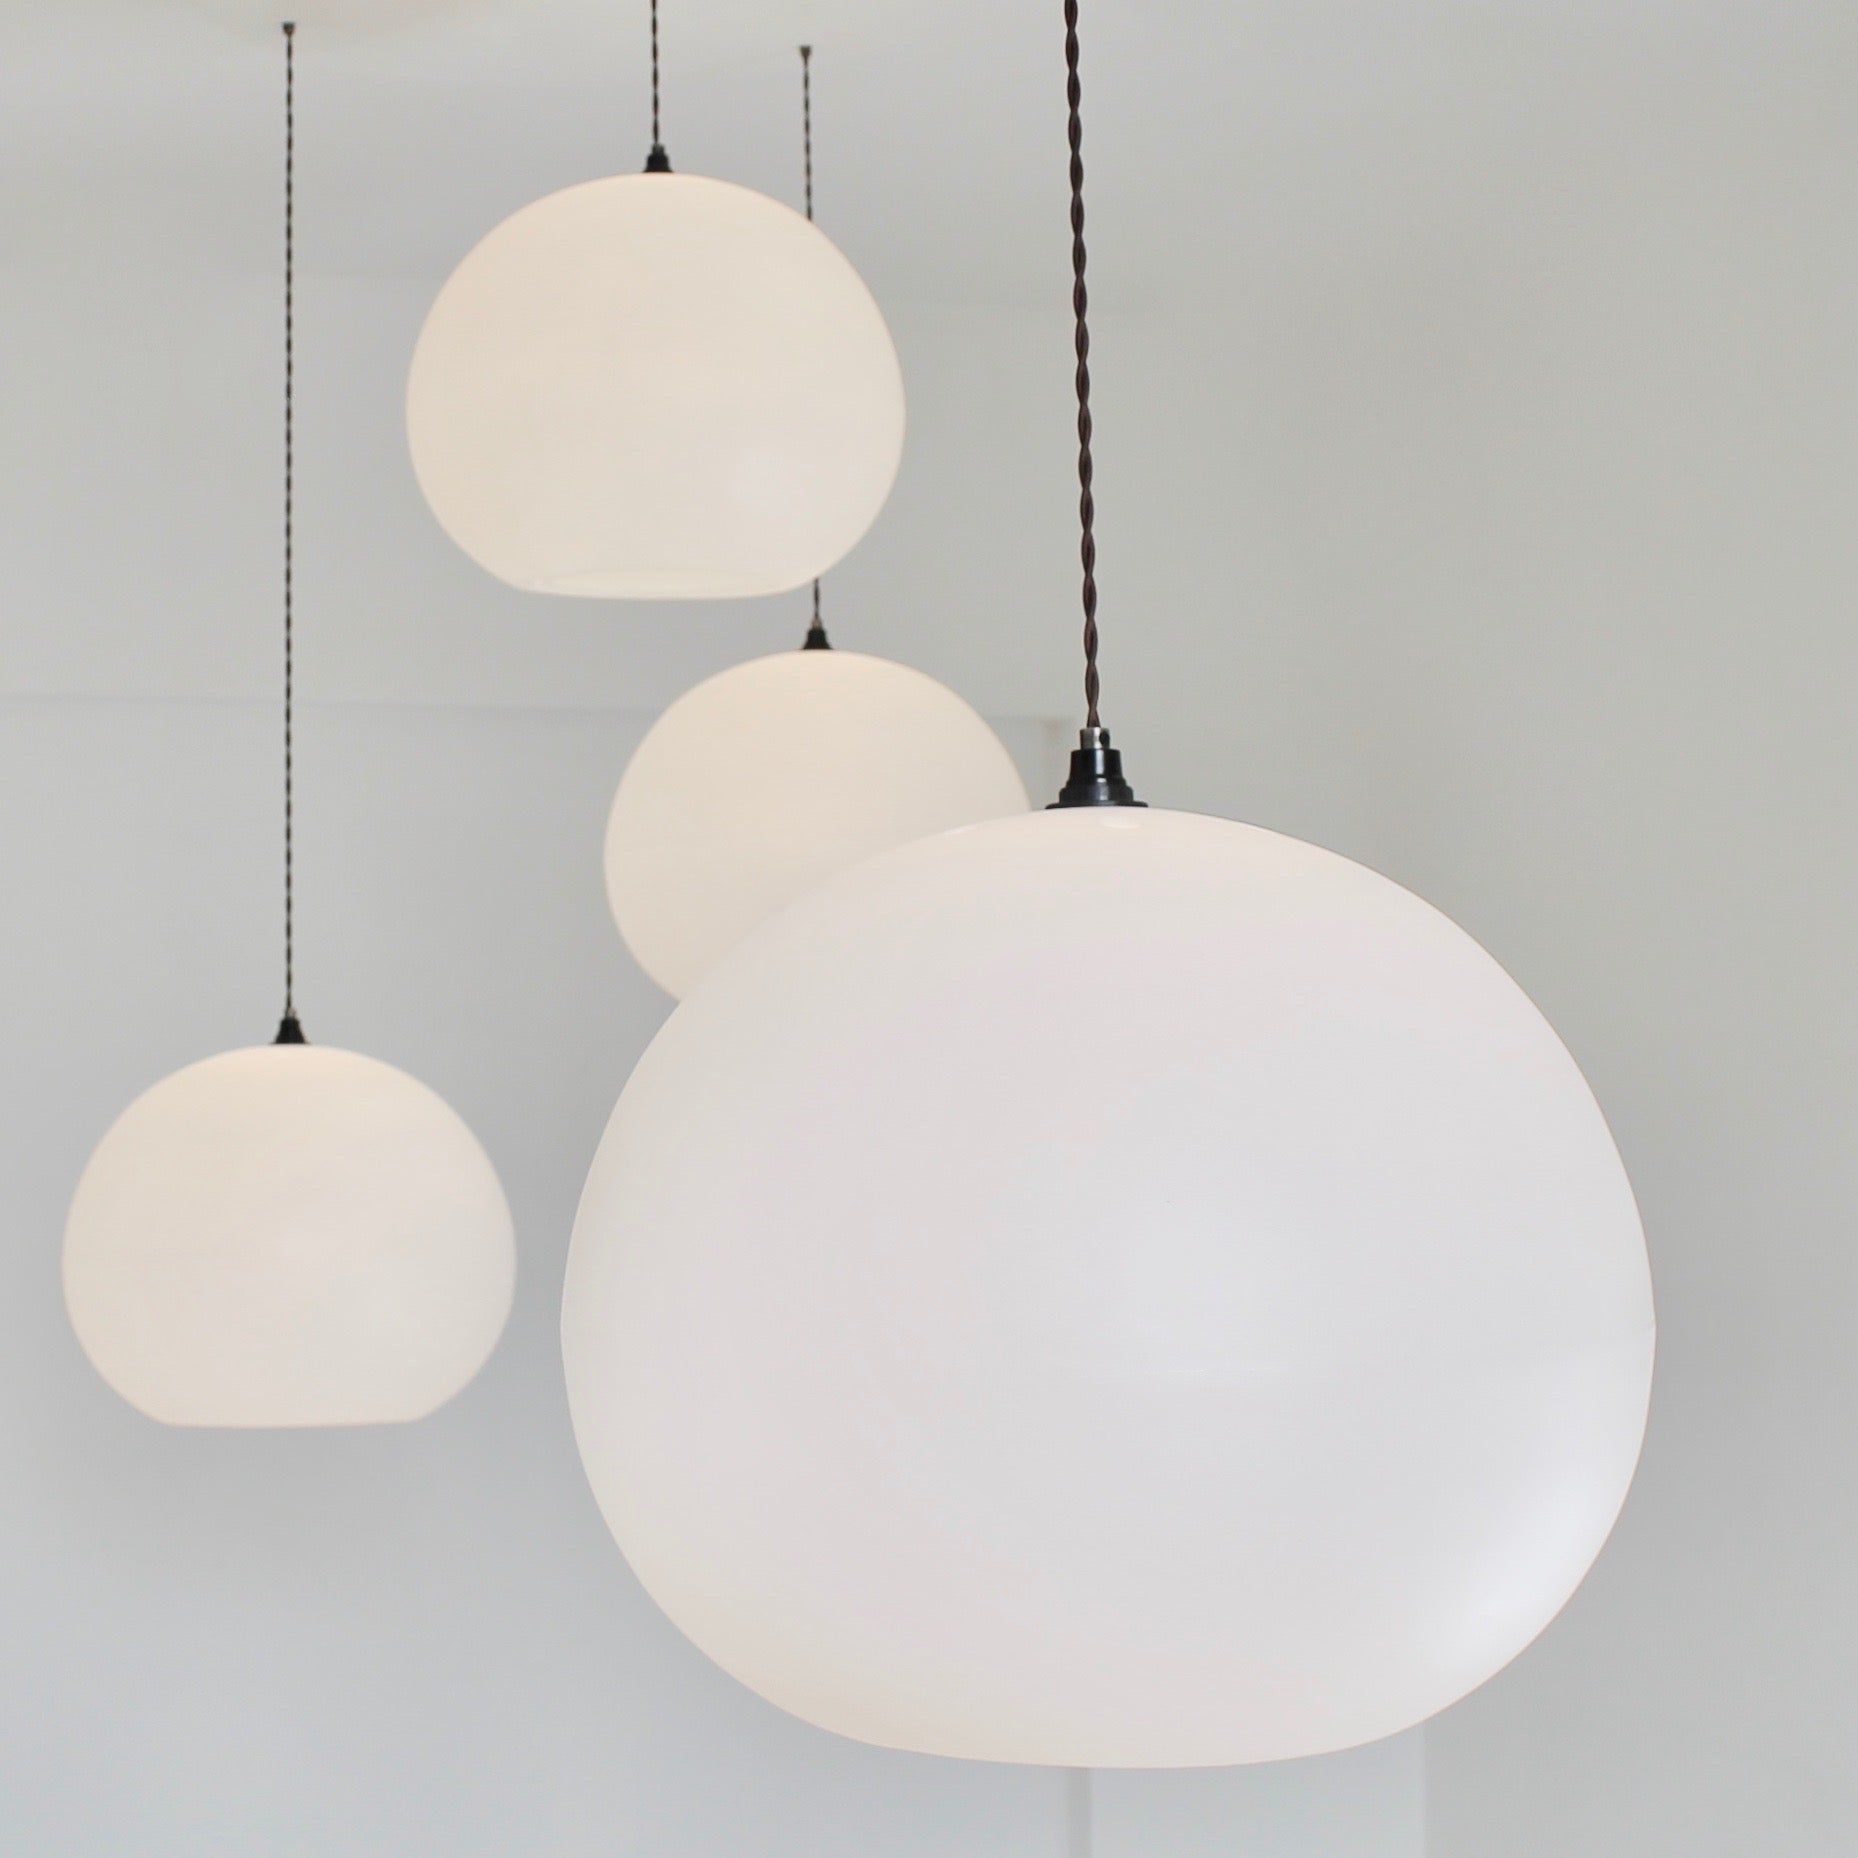 Polly Inverse Lampshade, multiple, large quality white lighting, contemporary pendant lighting, white lights, calm lighting, kitchen suspension, living room lighting